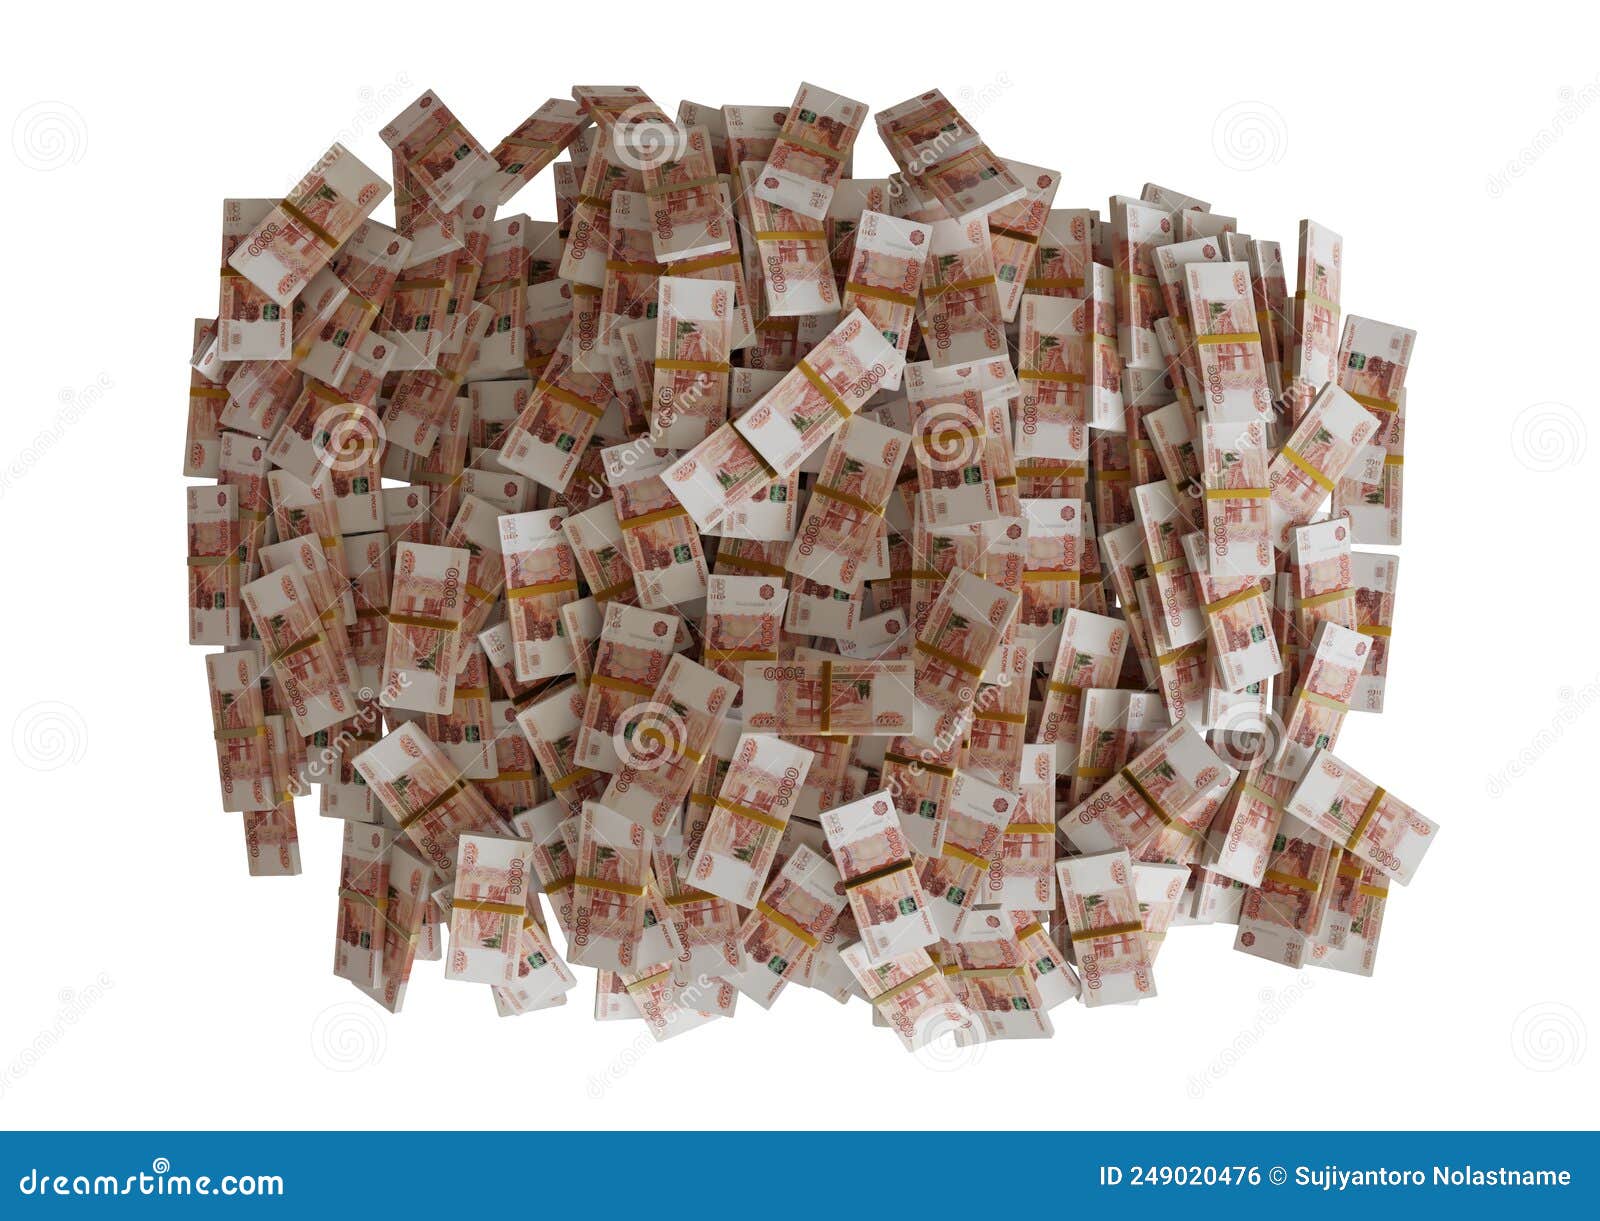 stack russian cash or banknotes of rusia rubles scattered on a white background  the concept of economic, finance, backgro